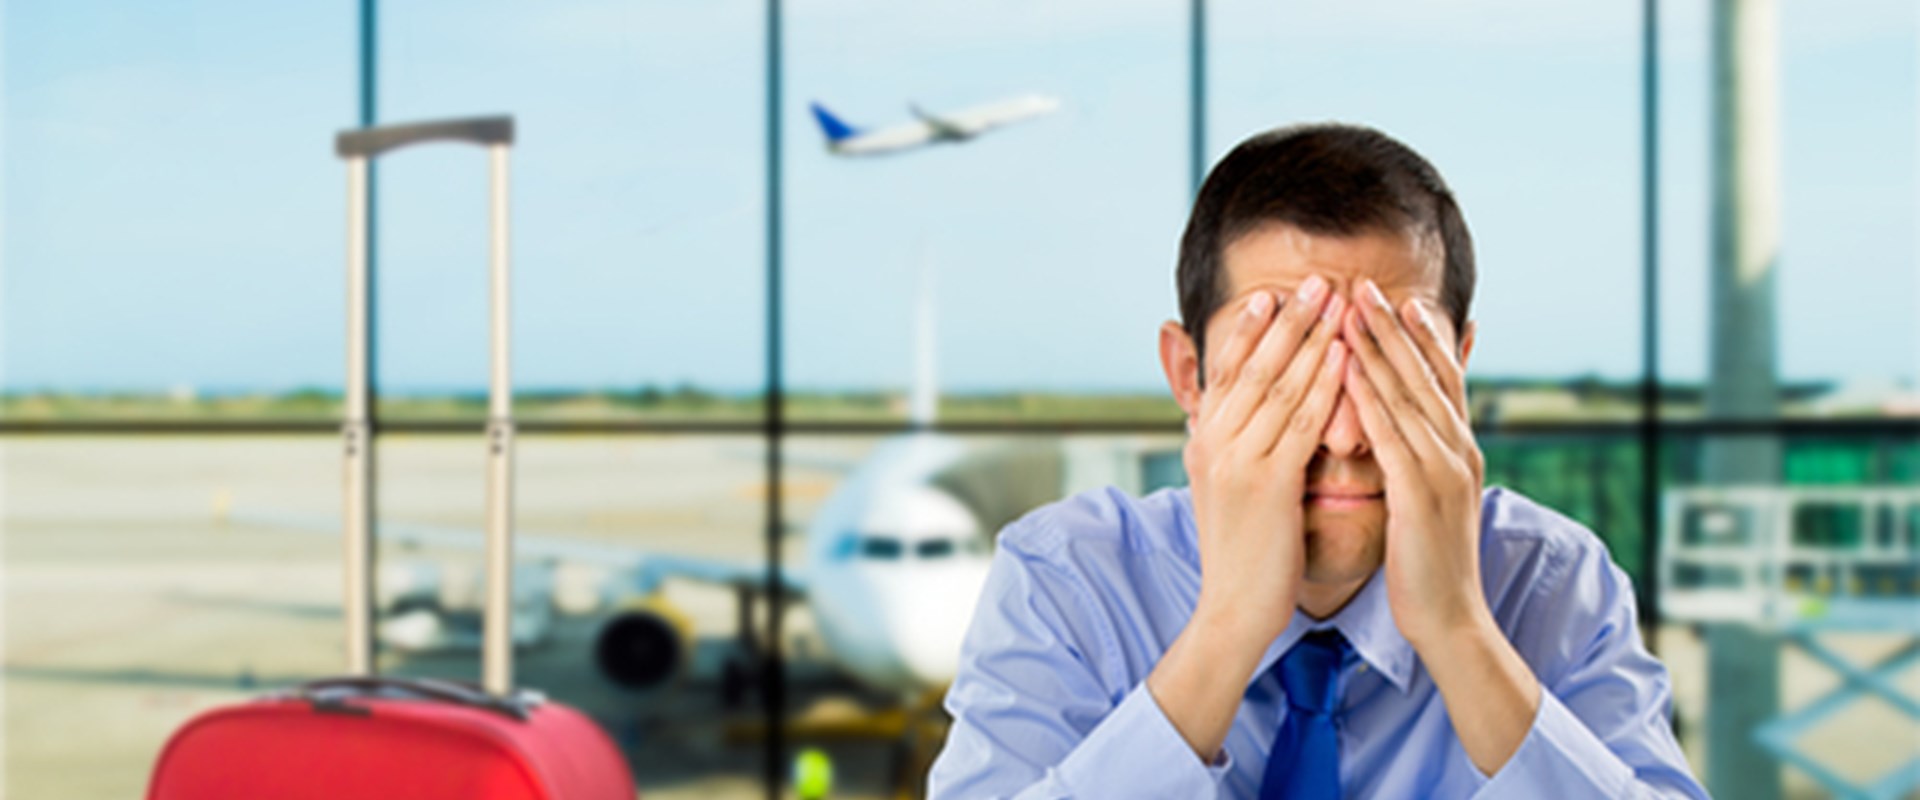 Ease Holiday Travel Stress with These Tips